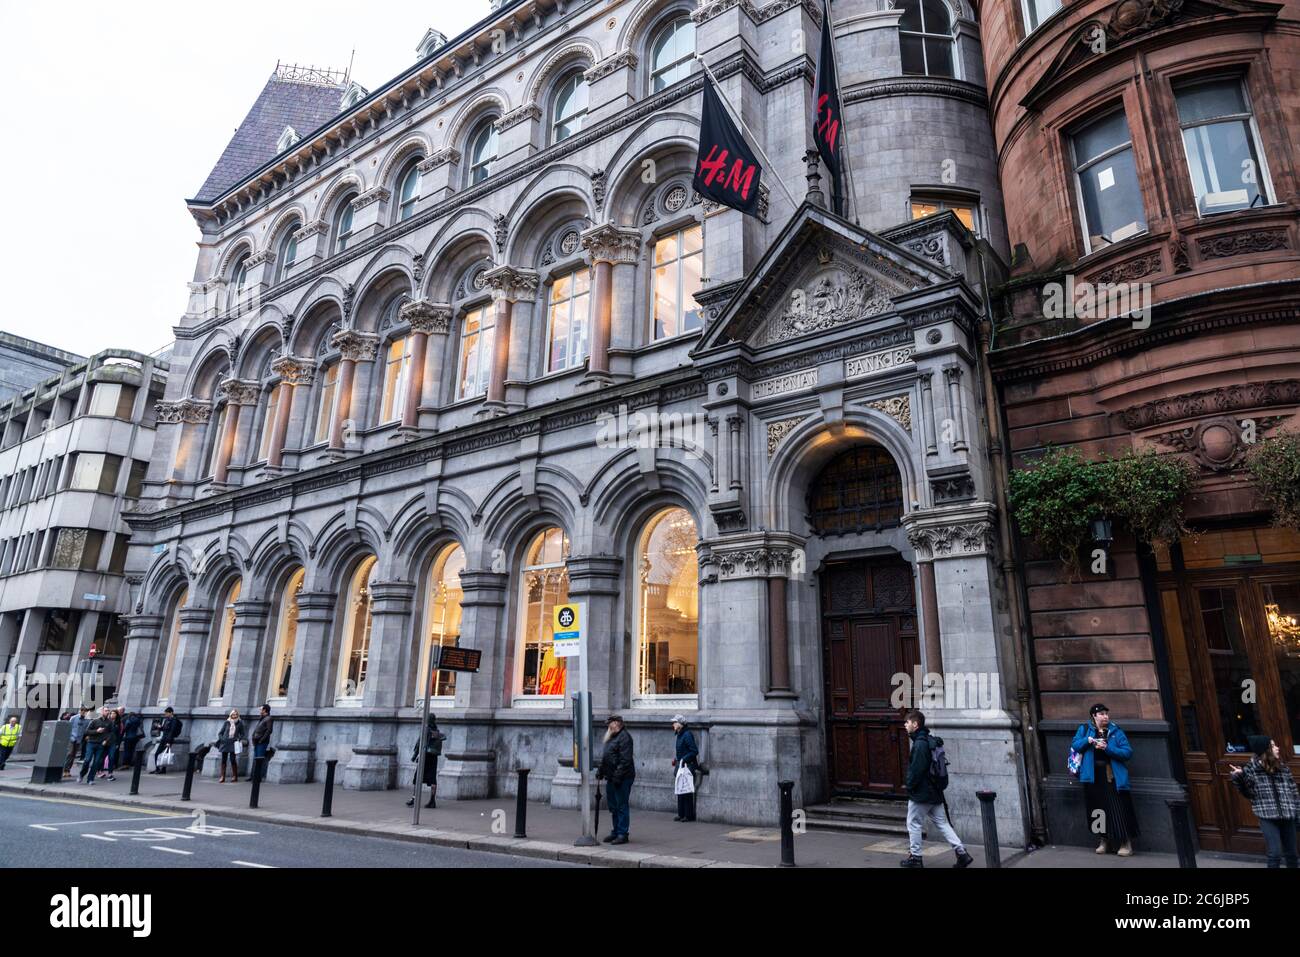 Dublin, Ireland - December 30, 2019: Facade of a HM or H&M clothing store  with people around in Dame street of Dublin, Ireland Stock Photo - Alamy